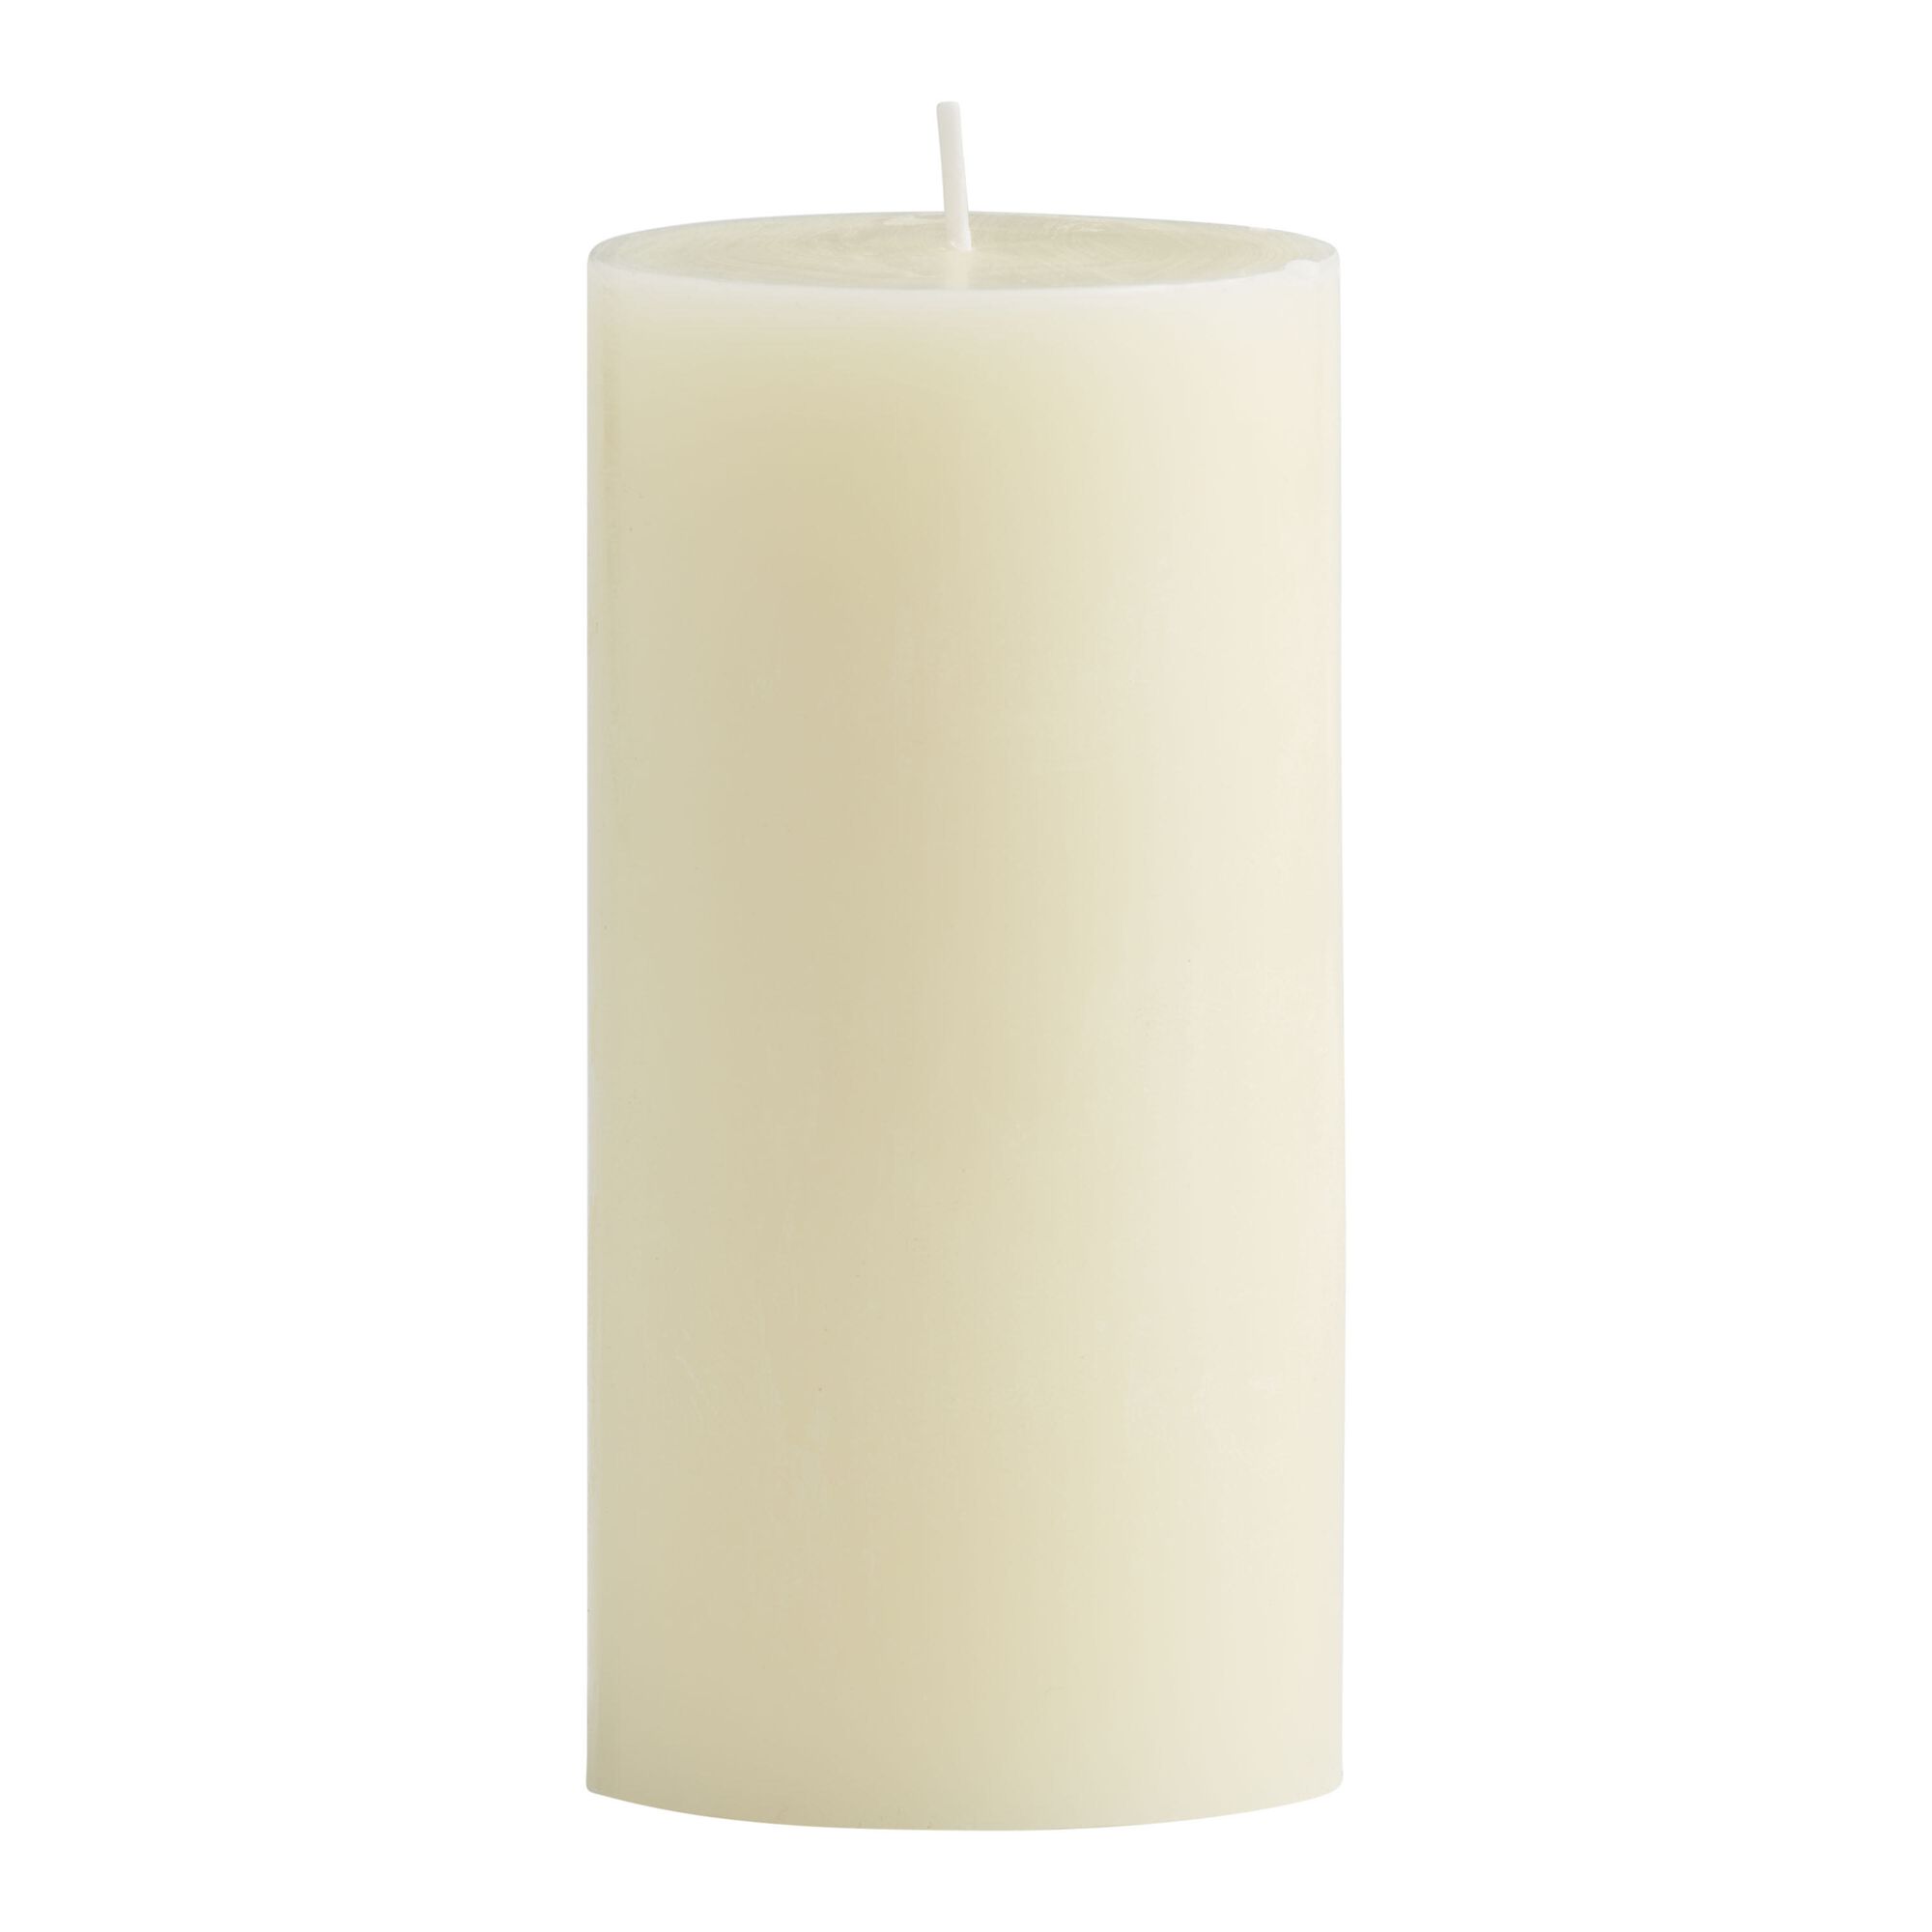 Ivory Unscented Pillar Candle